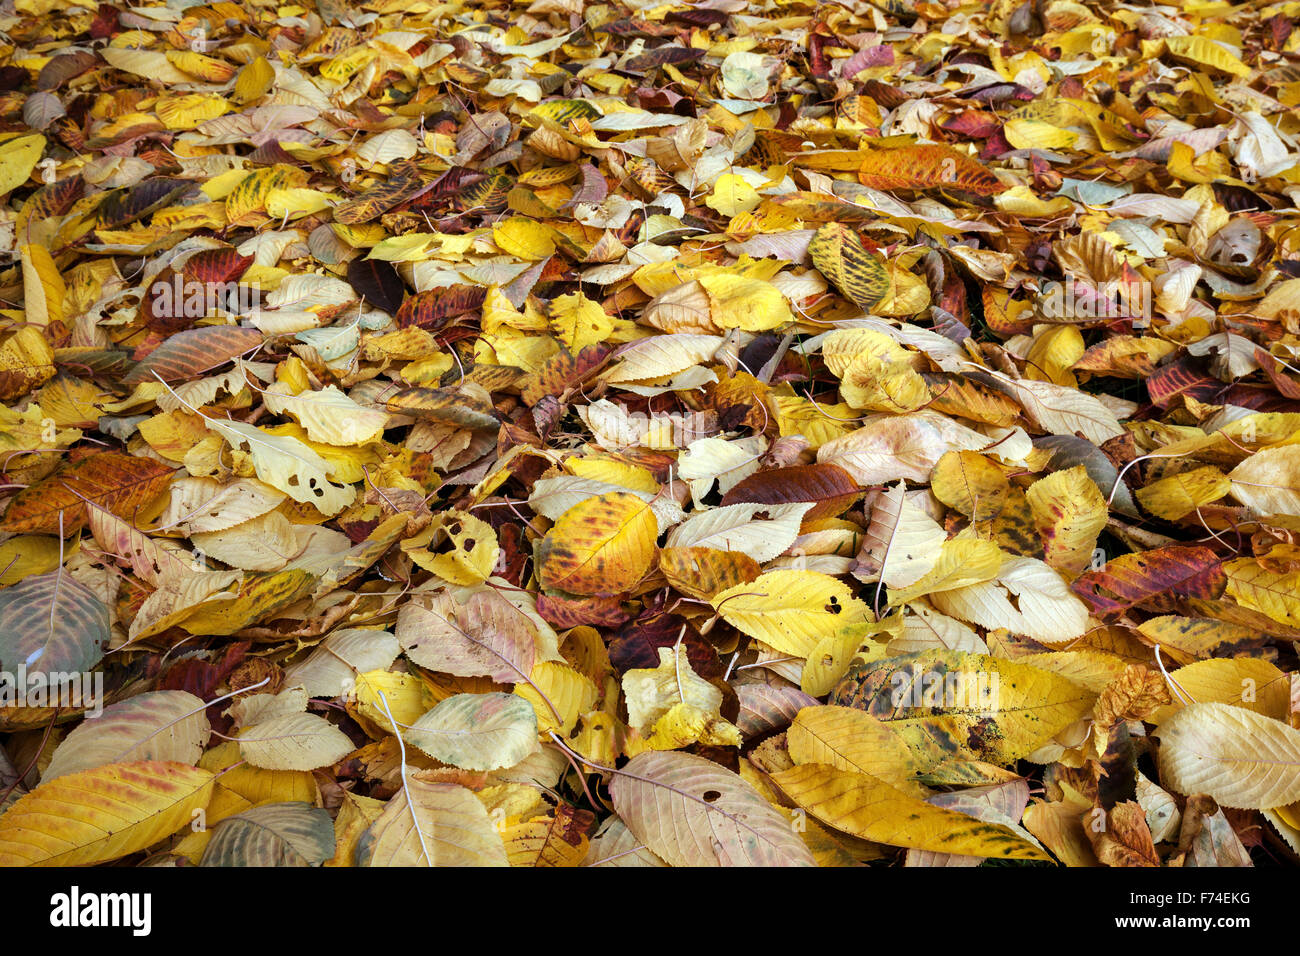 Autumn leaves on ground, Germany Stock Photo